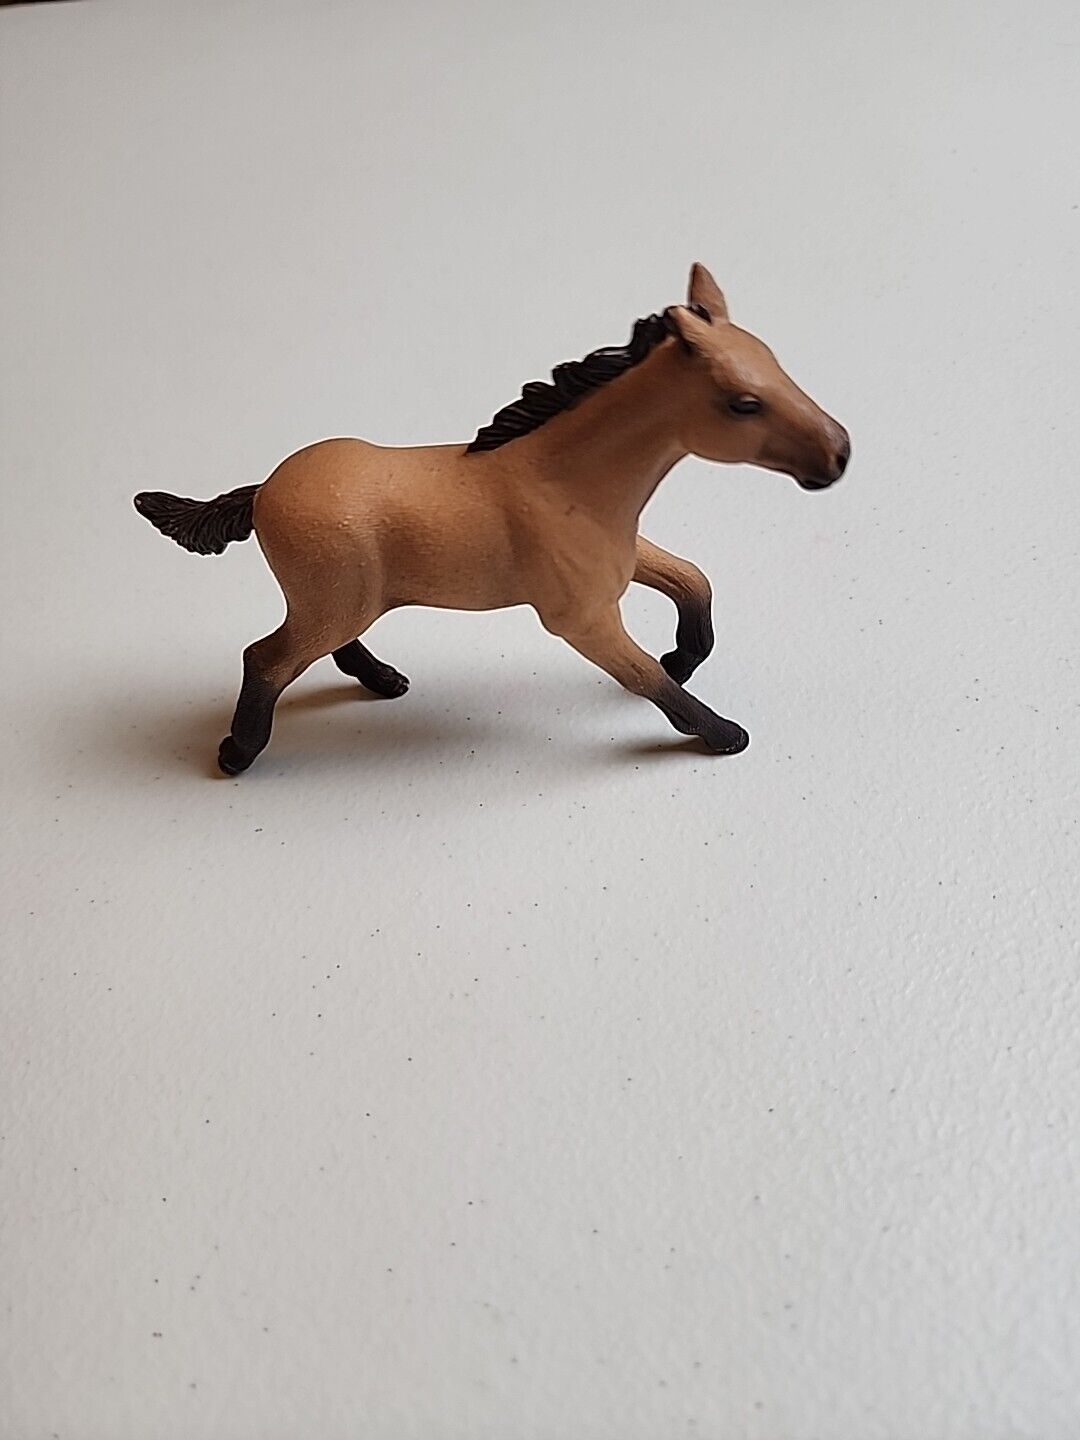 Schleich MUSTANG FOAL 2015 Horse Animal Figure 42195 Free Fast Ship 